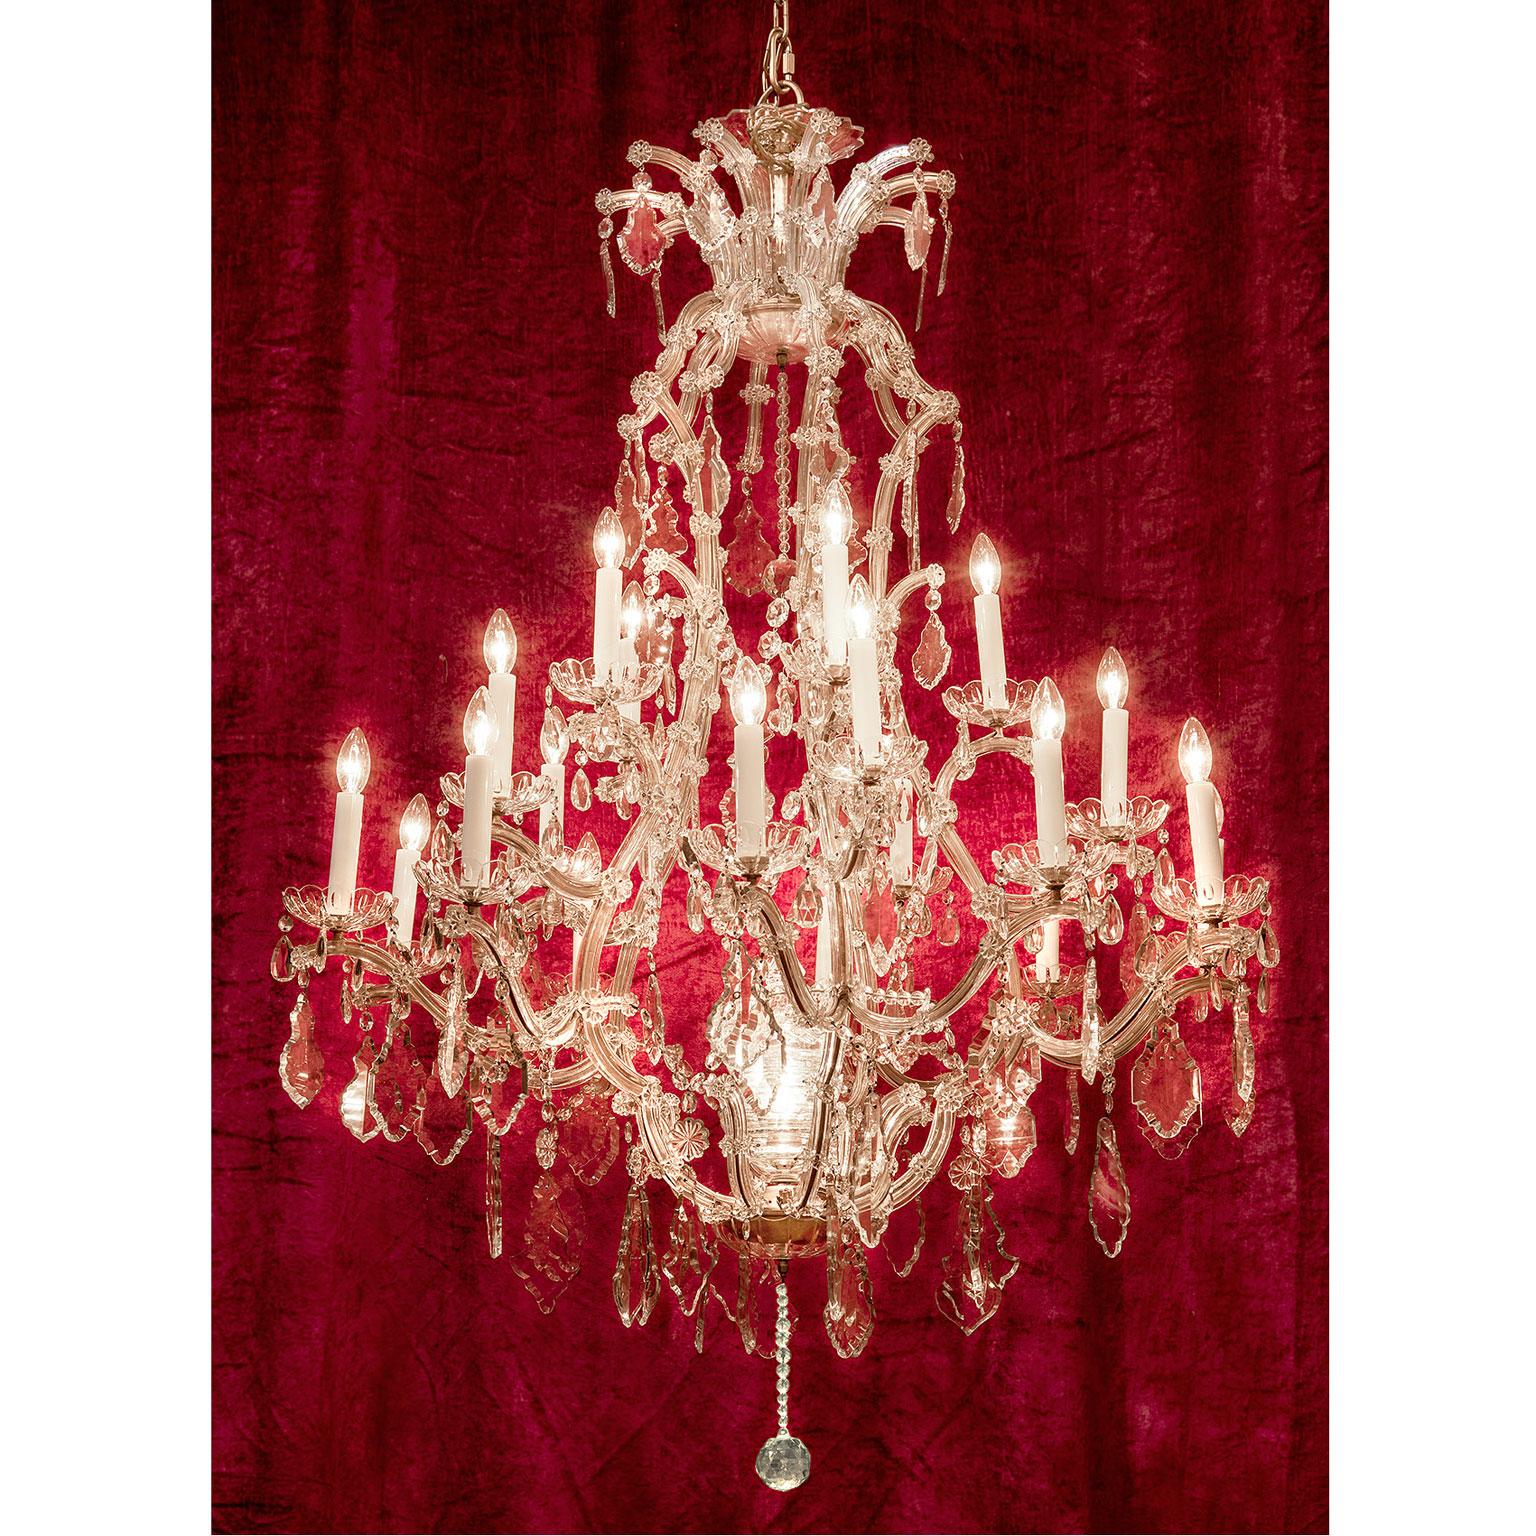 Important chandelier, late 19th century.

The finest materials - artfully cut Bohemian crystal - mouth-blown glass nozzles - perfect shape and luxurious - the finest neo-baroque!

It once hung in the Villa San Remo, an extravagant domain in